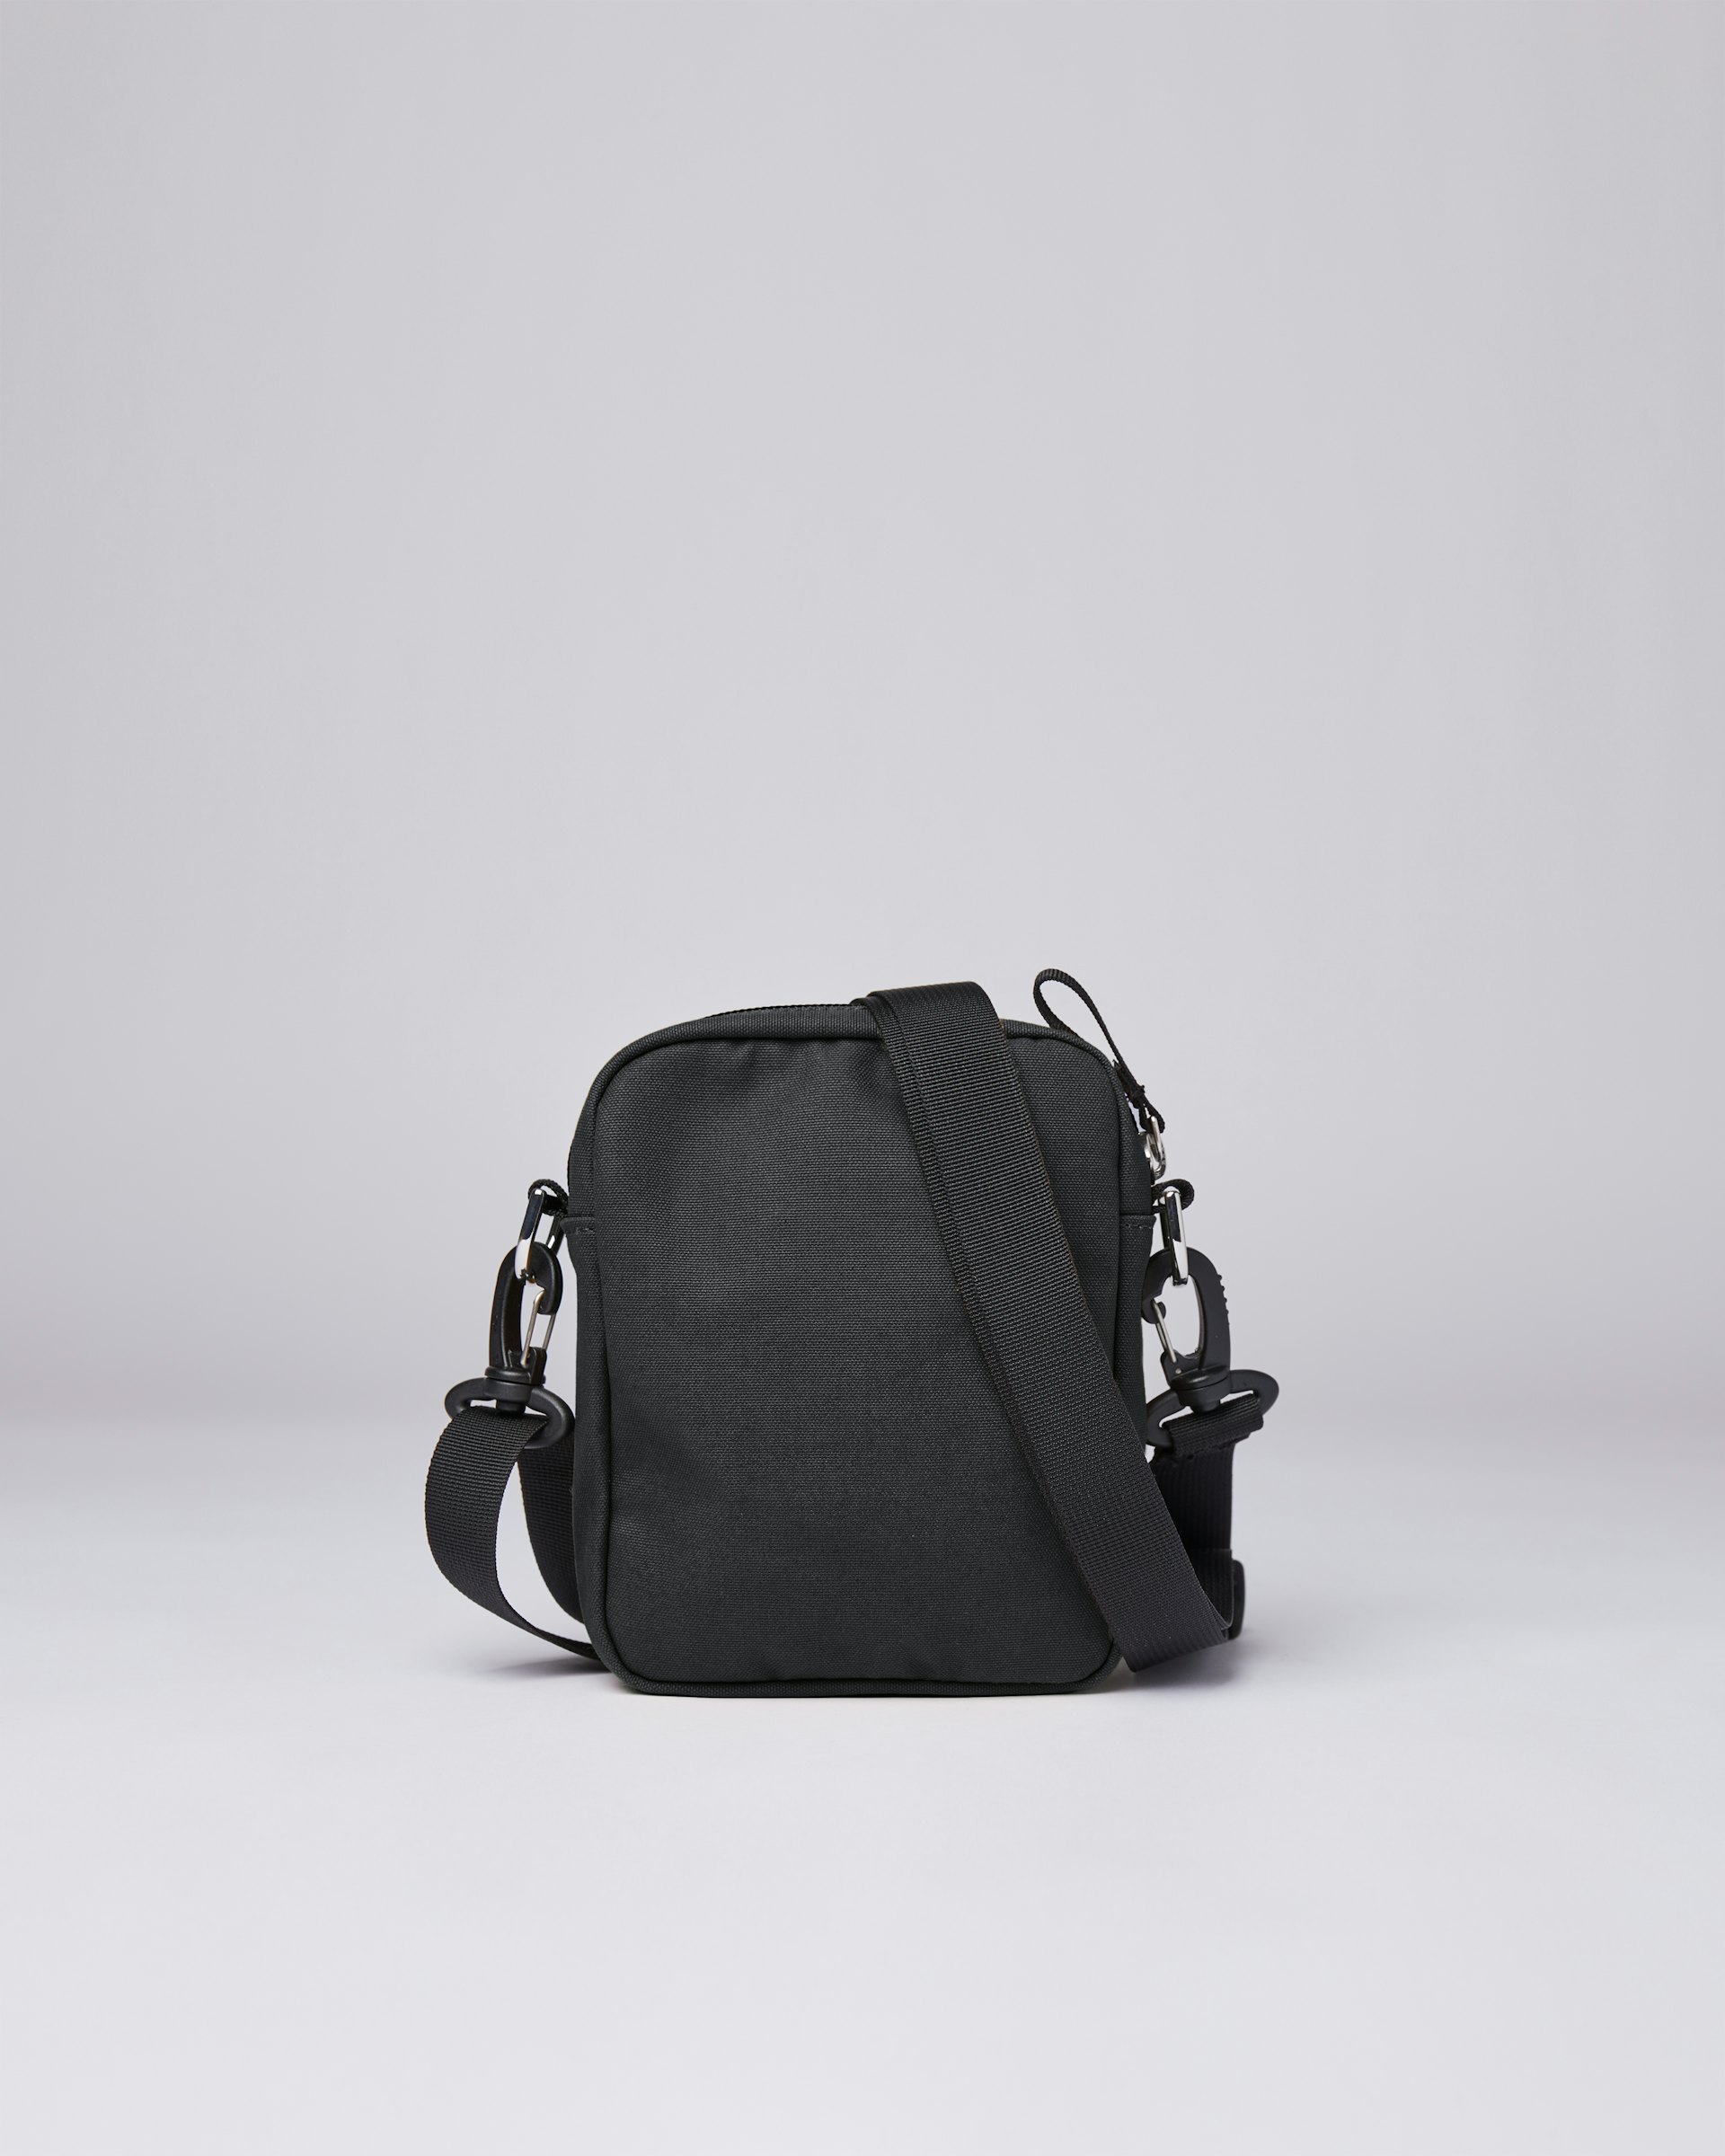 Sixten Vegan Black belongs to the category Shoulder bags and is in color black (3 of 4)